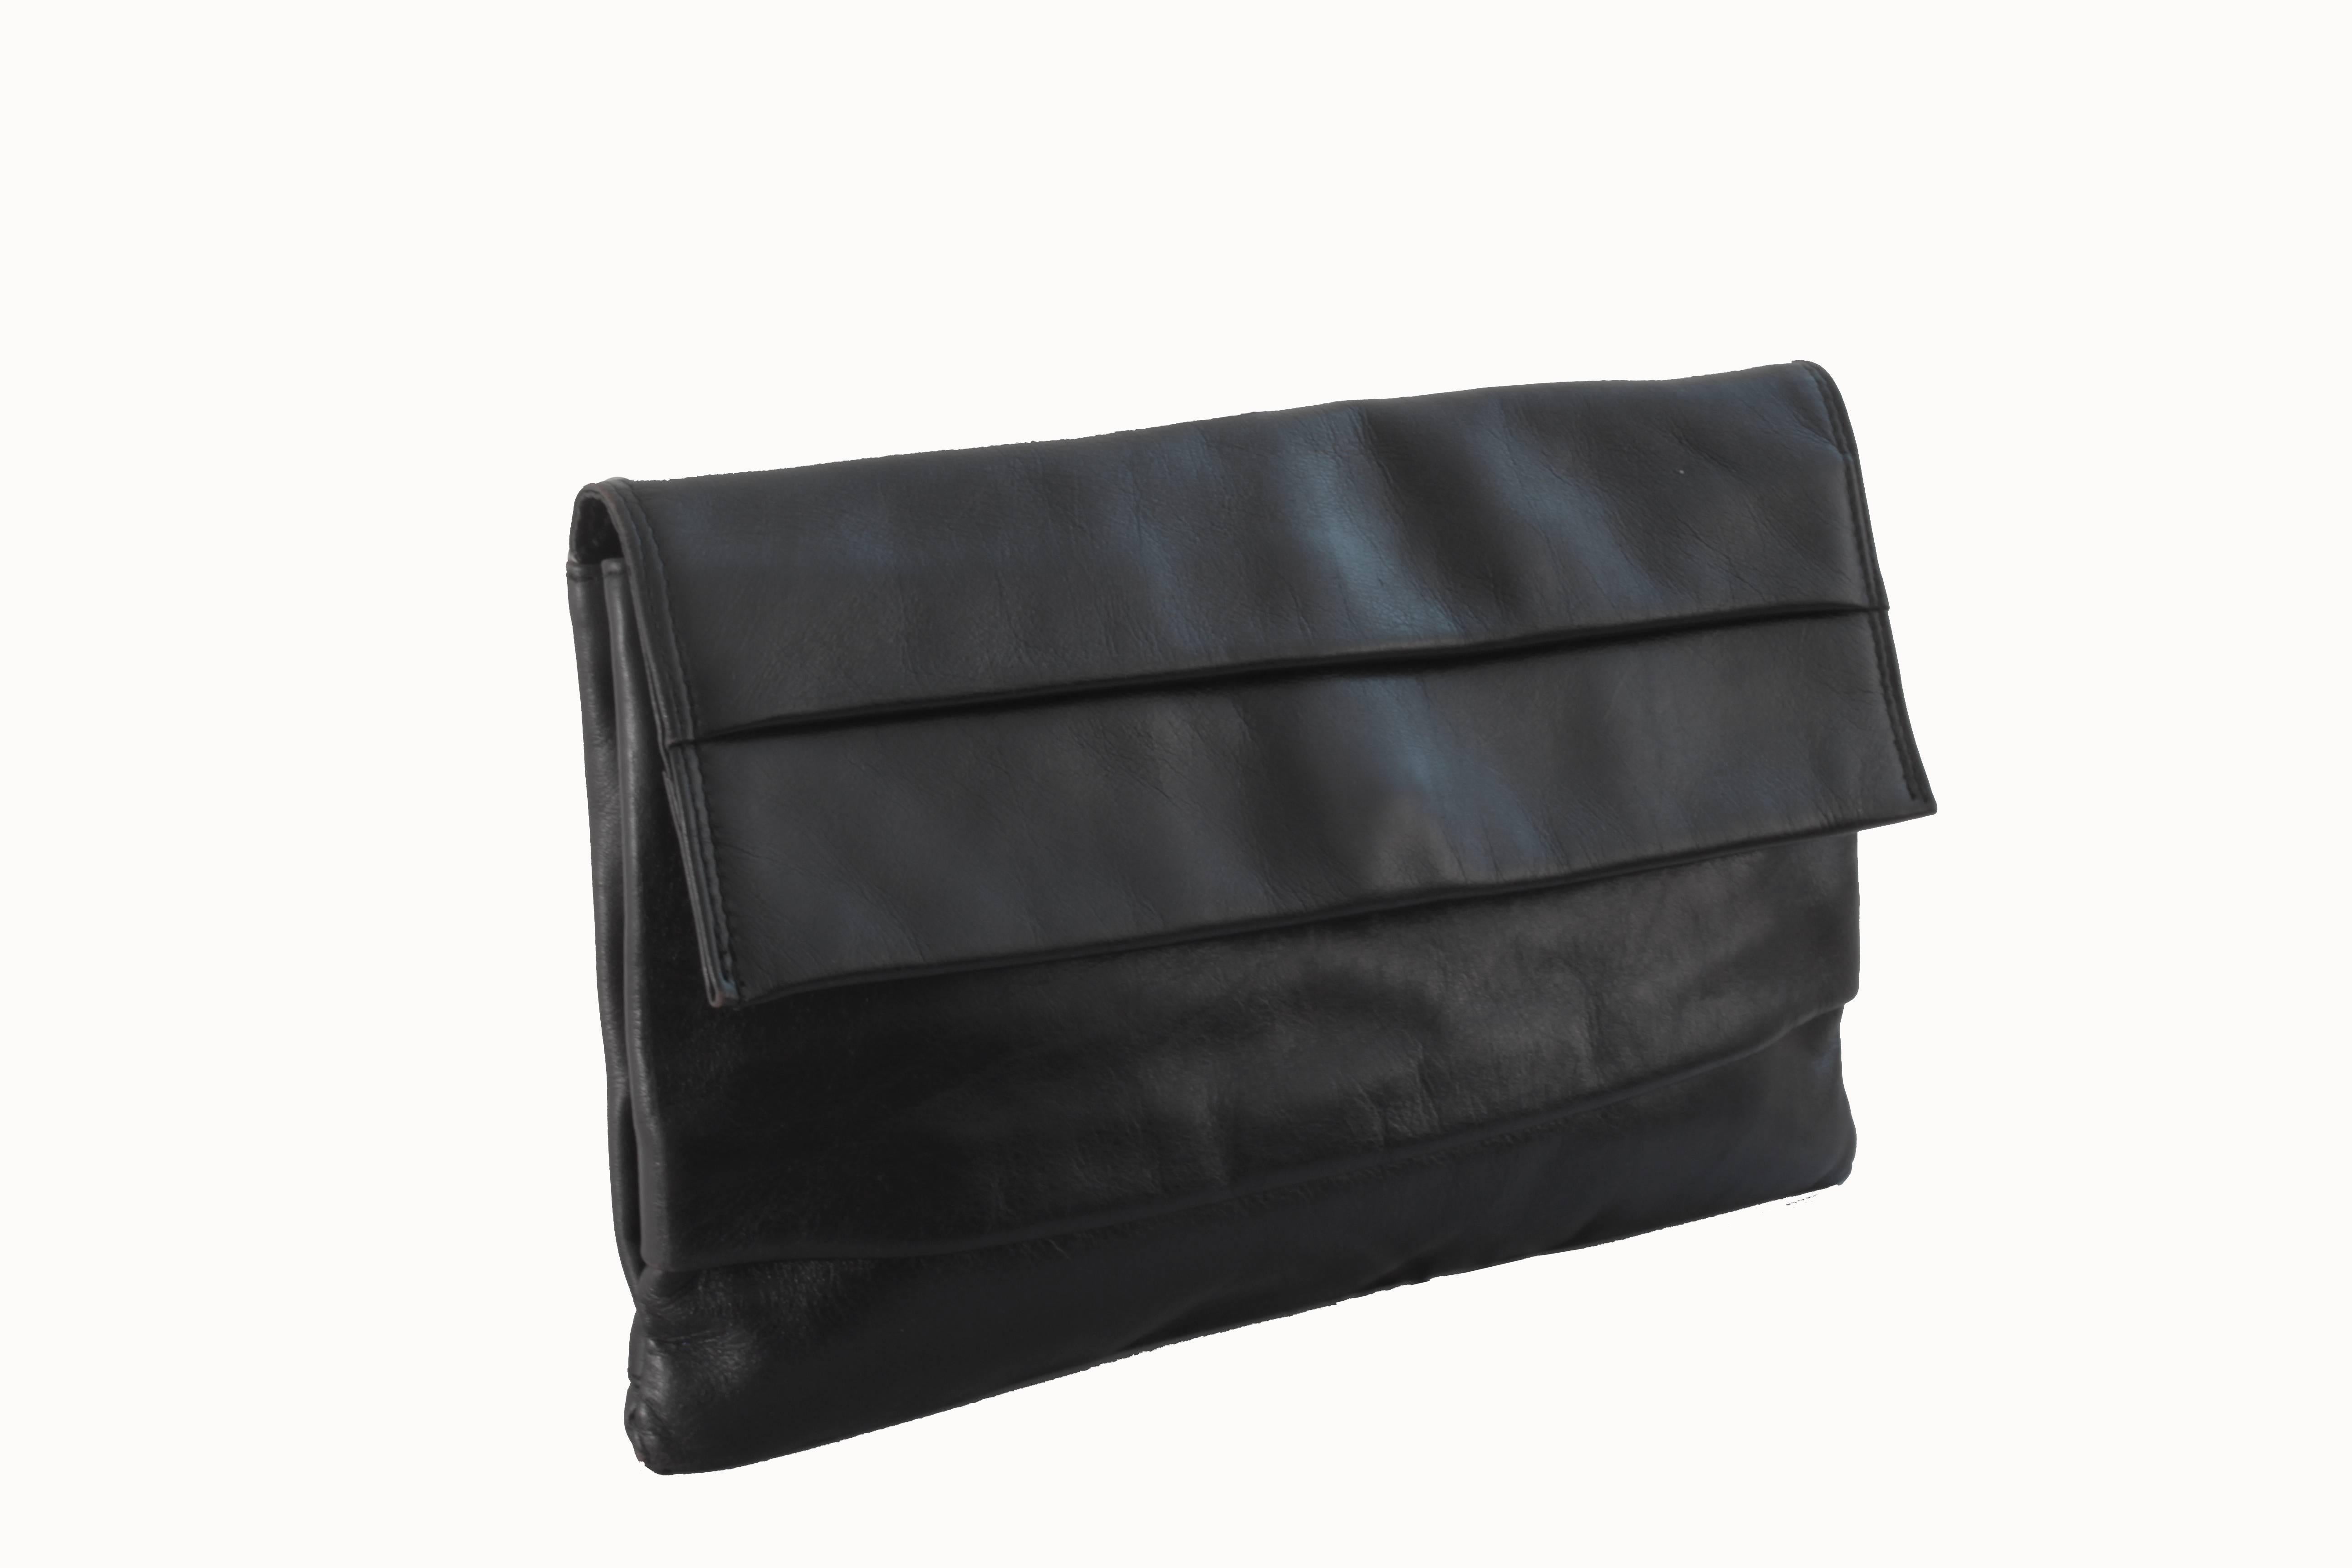 This classic black leather clutch bag was made in Italy for Dayton's Department Store, most likely in the early 60s, before they merged with JL Hudson company. Simple in it's design, it fastens with a magnetic snap under the top flap and features